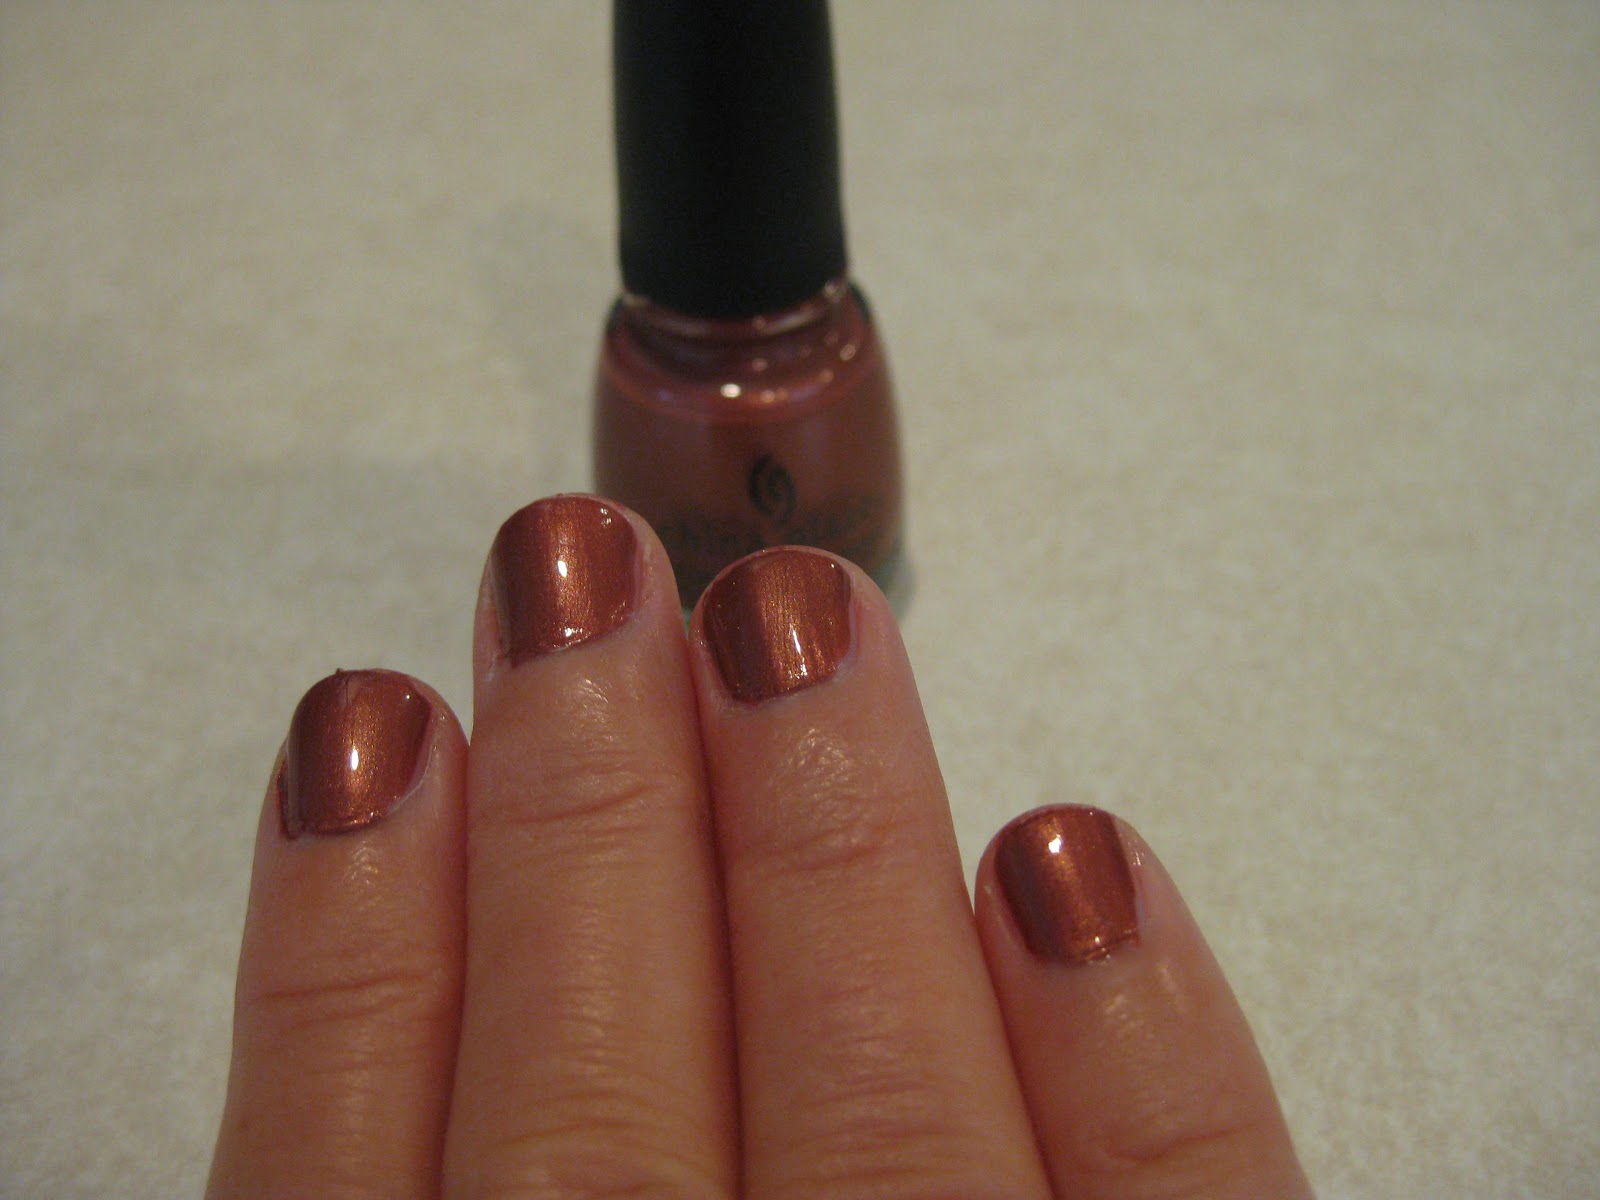 4. China Glaze Nail Lacquer in "Soul Mates" - wide 7